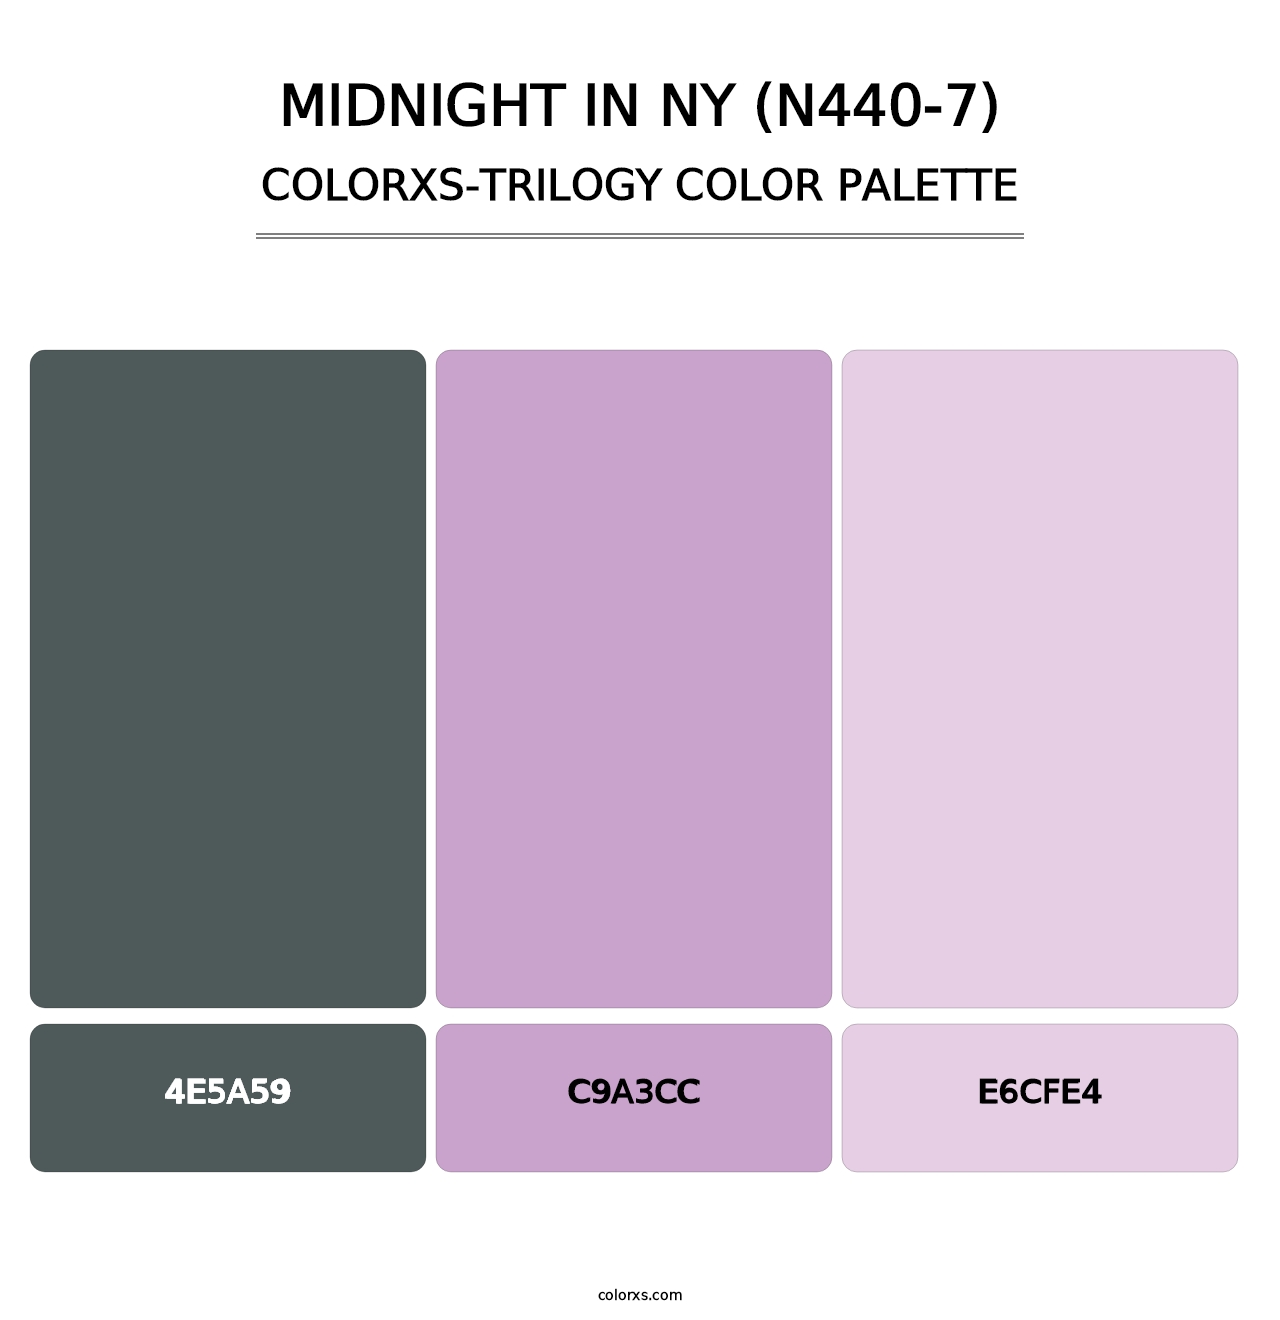 Midnight In Ny (N440-7) - Colorxs Trilogy Palette